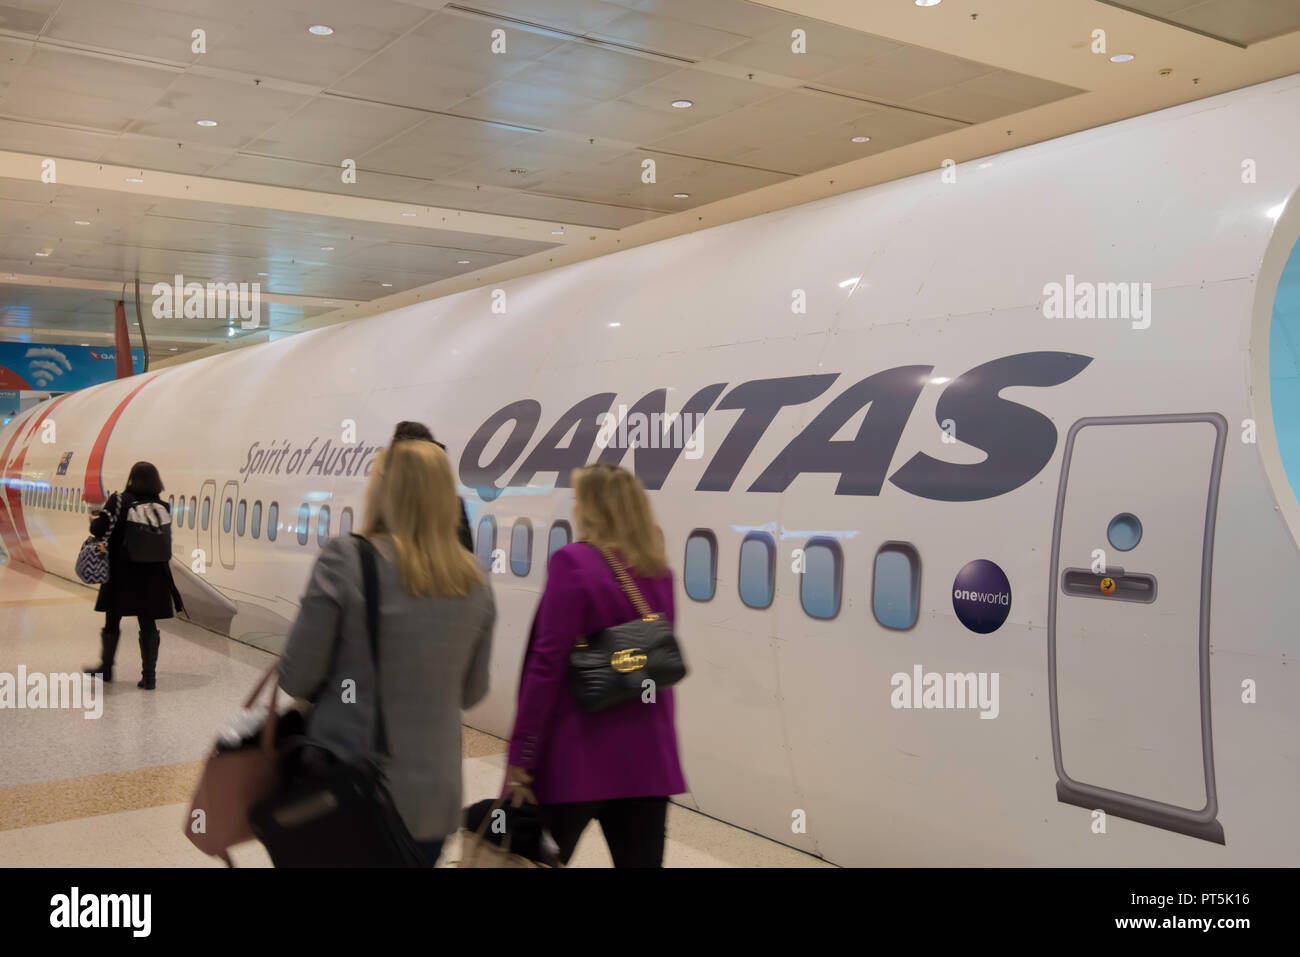 A mock up of a Qantas plane fuselage that covers a moving footway inside the departure area airside at Sydney Domestic Airport in Australia Stock Photo